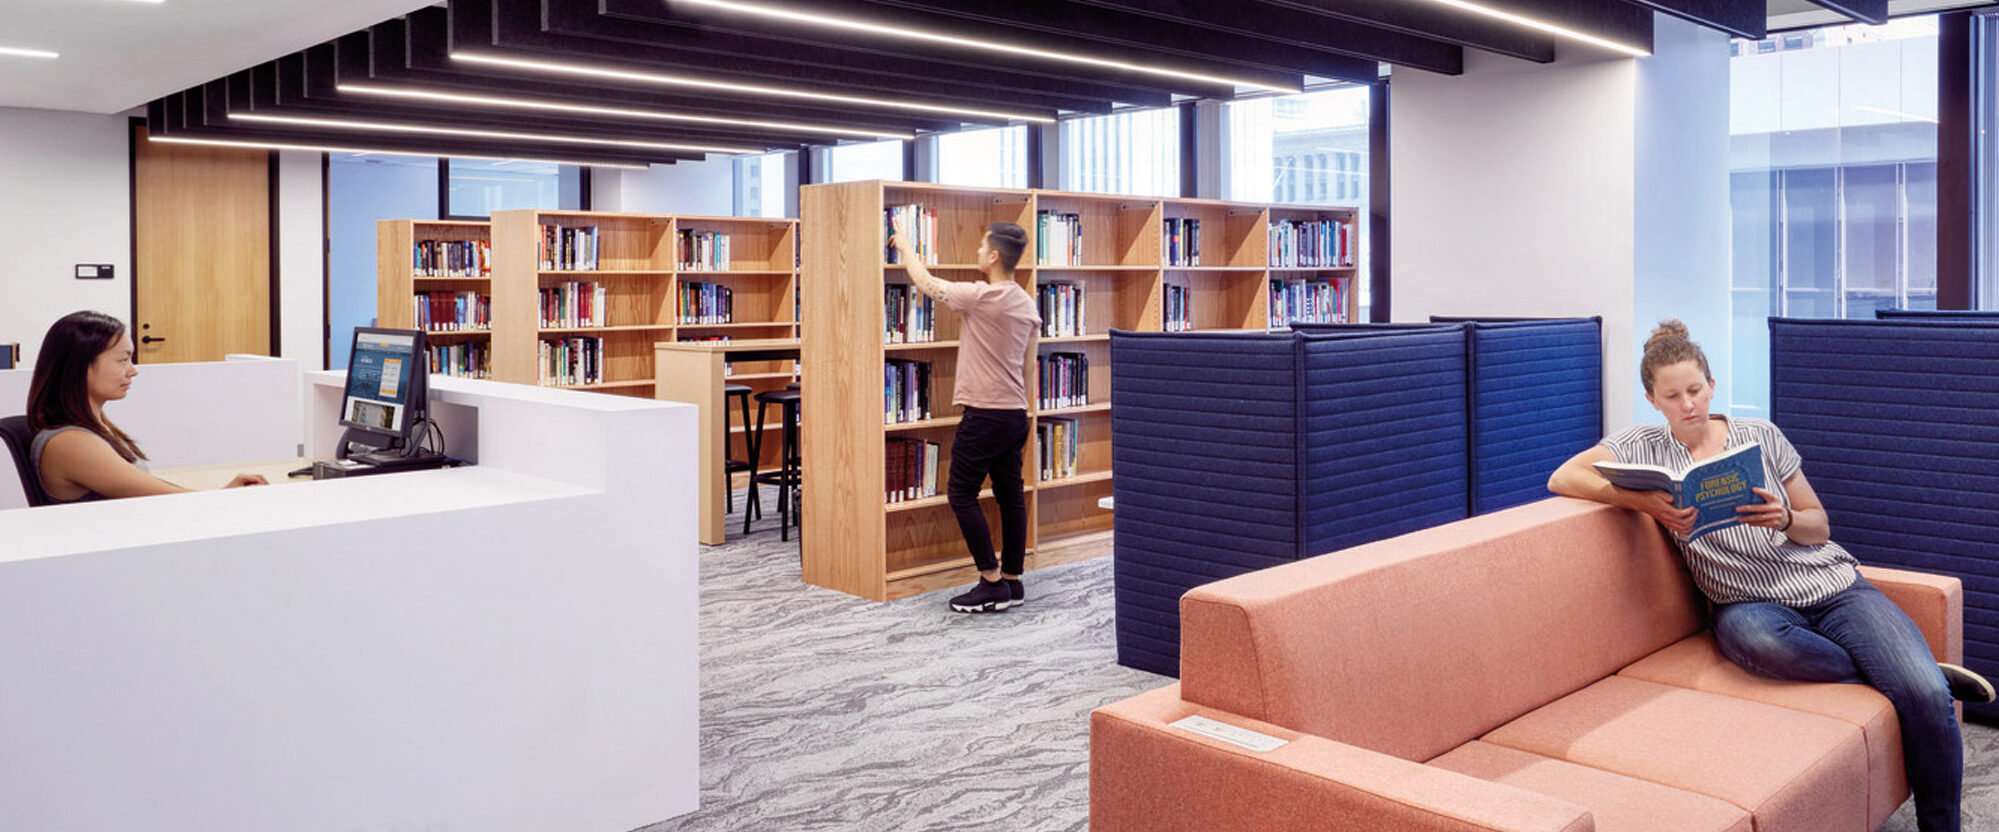 Contemporary library interior featuring streamlined white reception desk, peach-colored modular seating, and blue privacy panels. Dark ceiling with recessed lighting contrasts with the gray carpeted floors. The space is organized with sleek bookshelves, offering a quiet, modern reading environment.